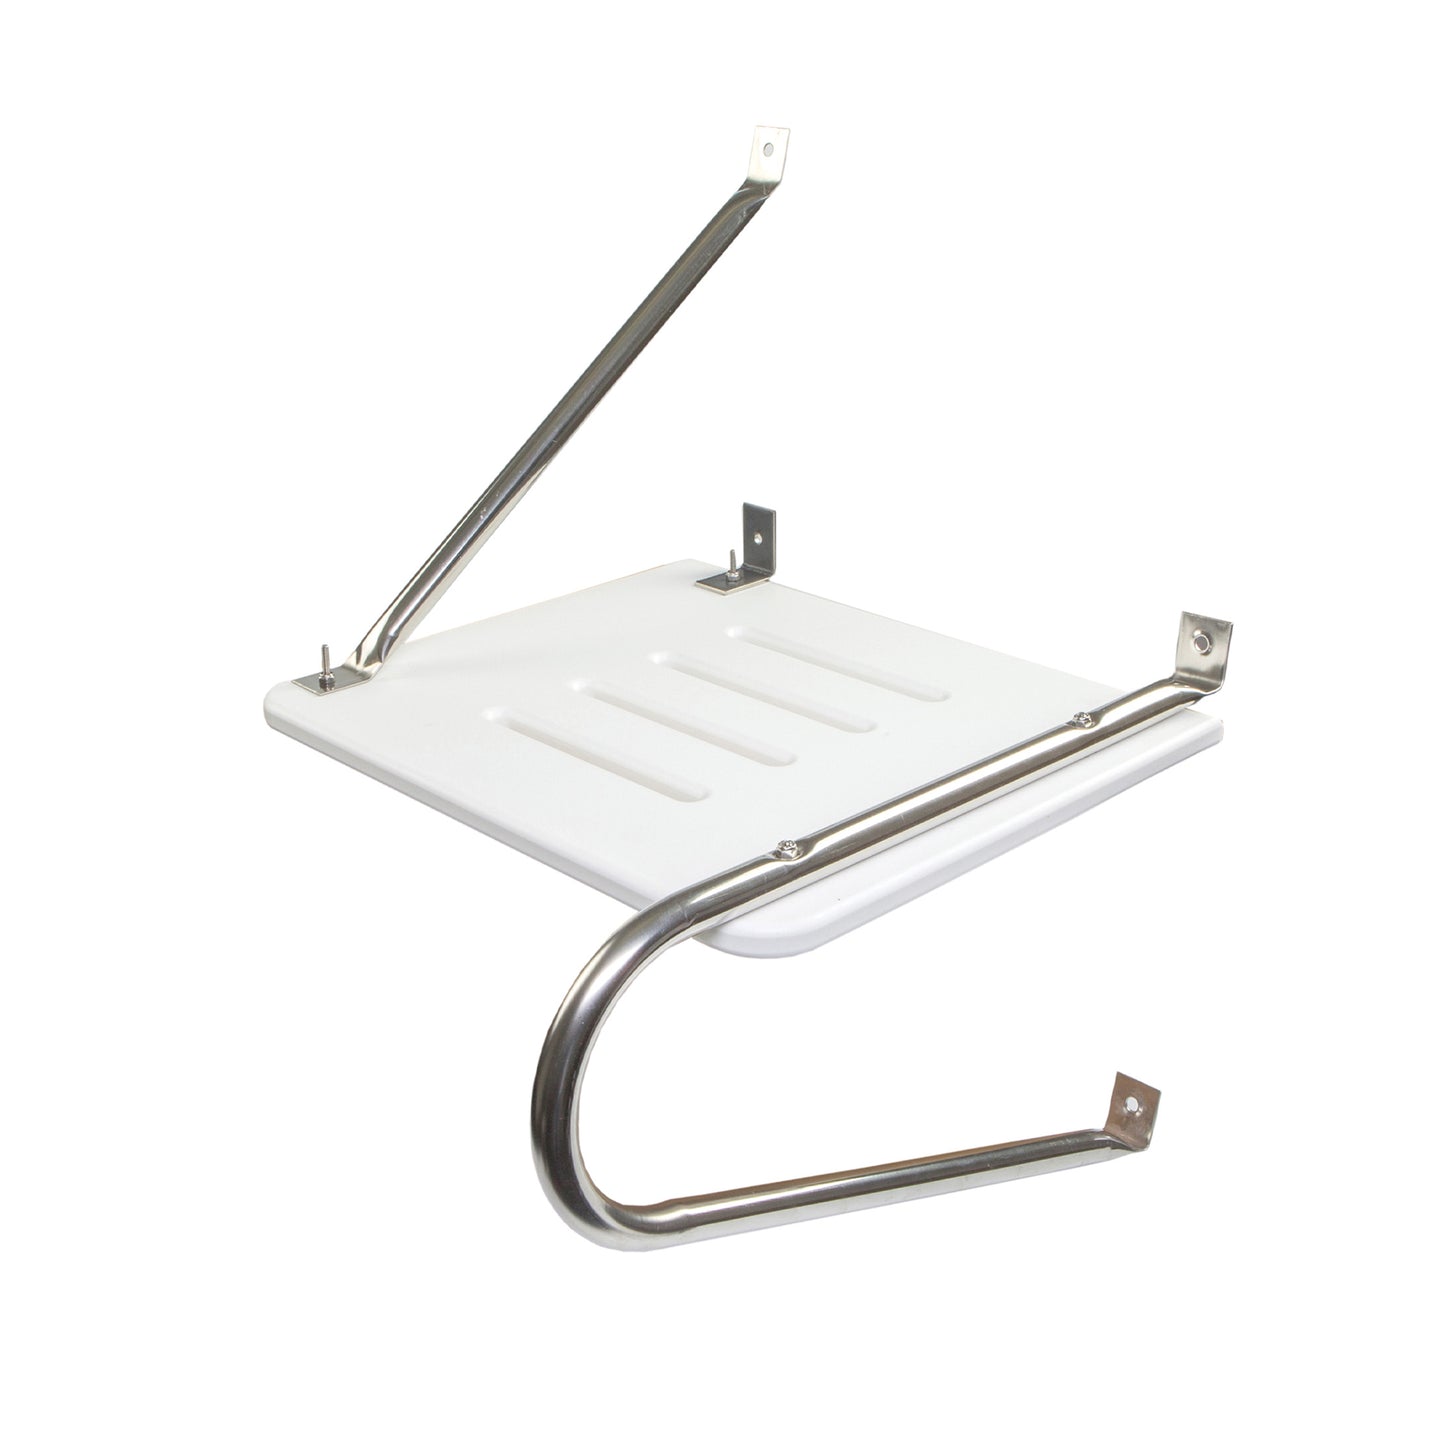 White Poly Swim Platform with Mounting Hardware for Boats with outboard Motors